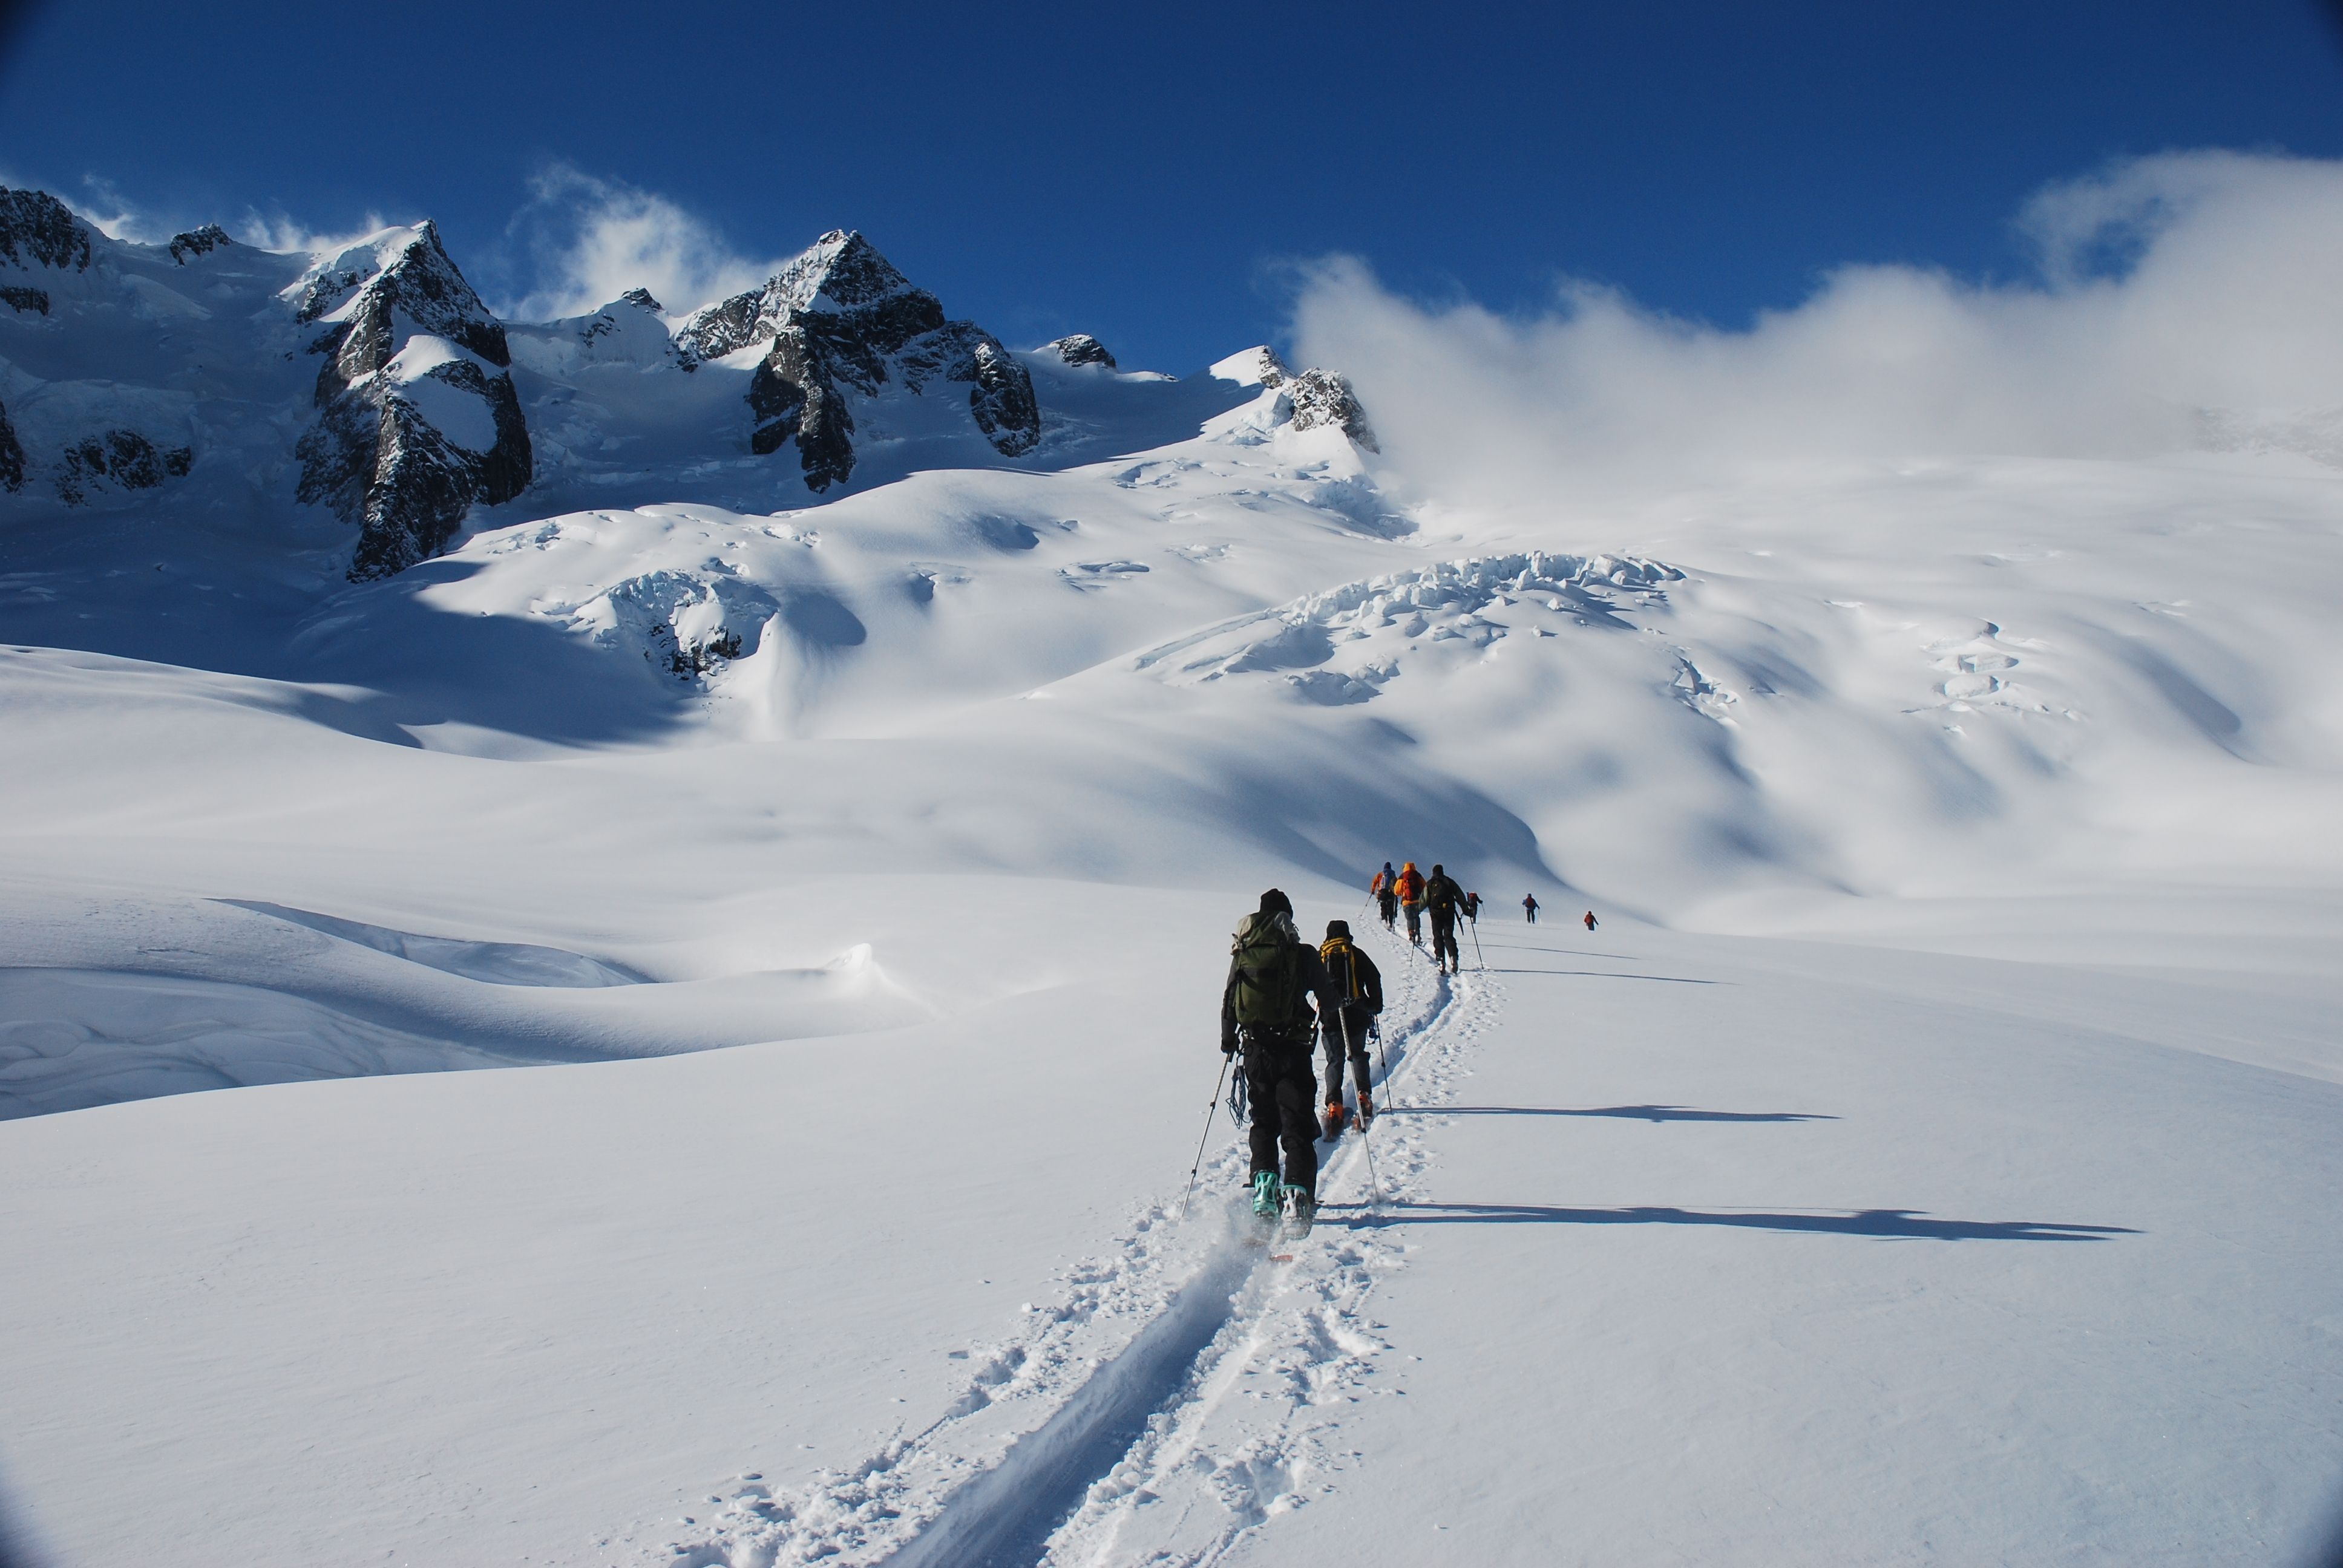 Backcountry ski touring high above Fairy Meadows ACC Hut